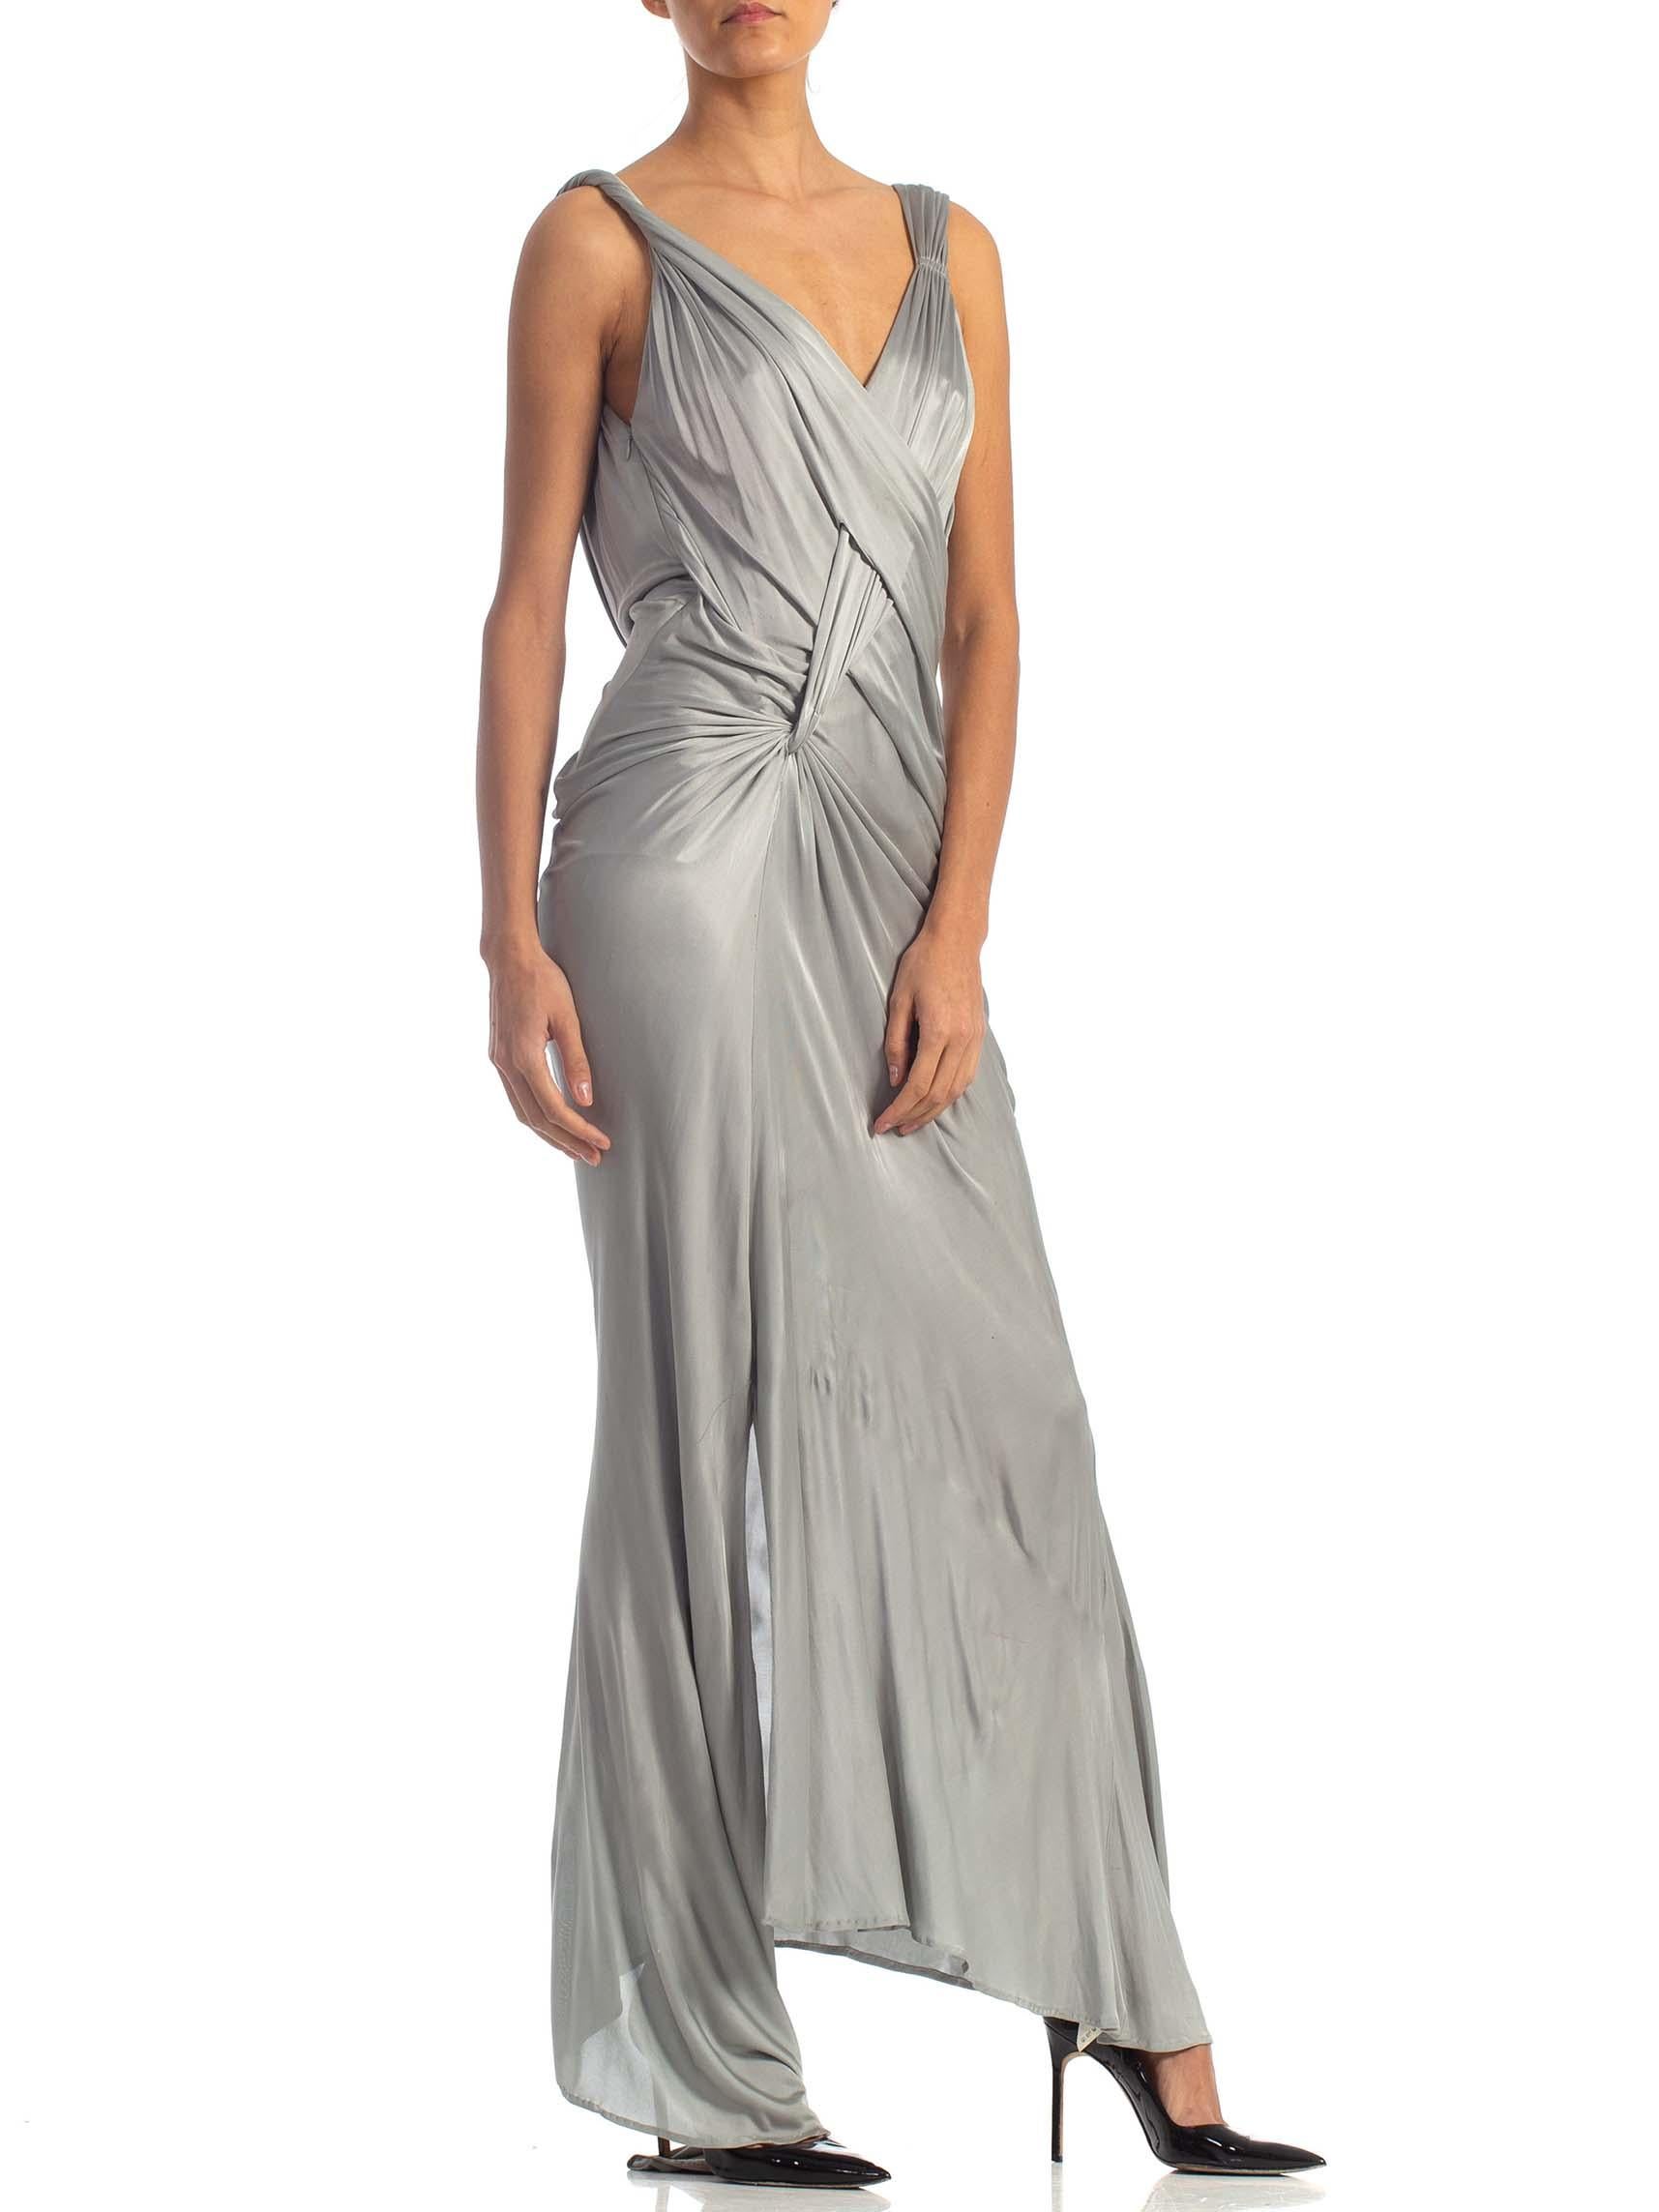 Women's 2000S JOHN GALLIANO Dove Grey Rayon Jersey Backless Gown With Slit For Sale